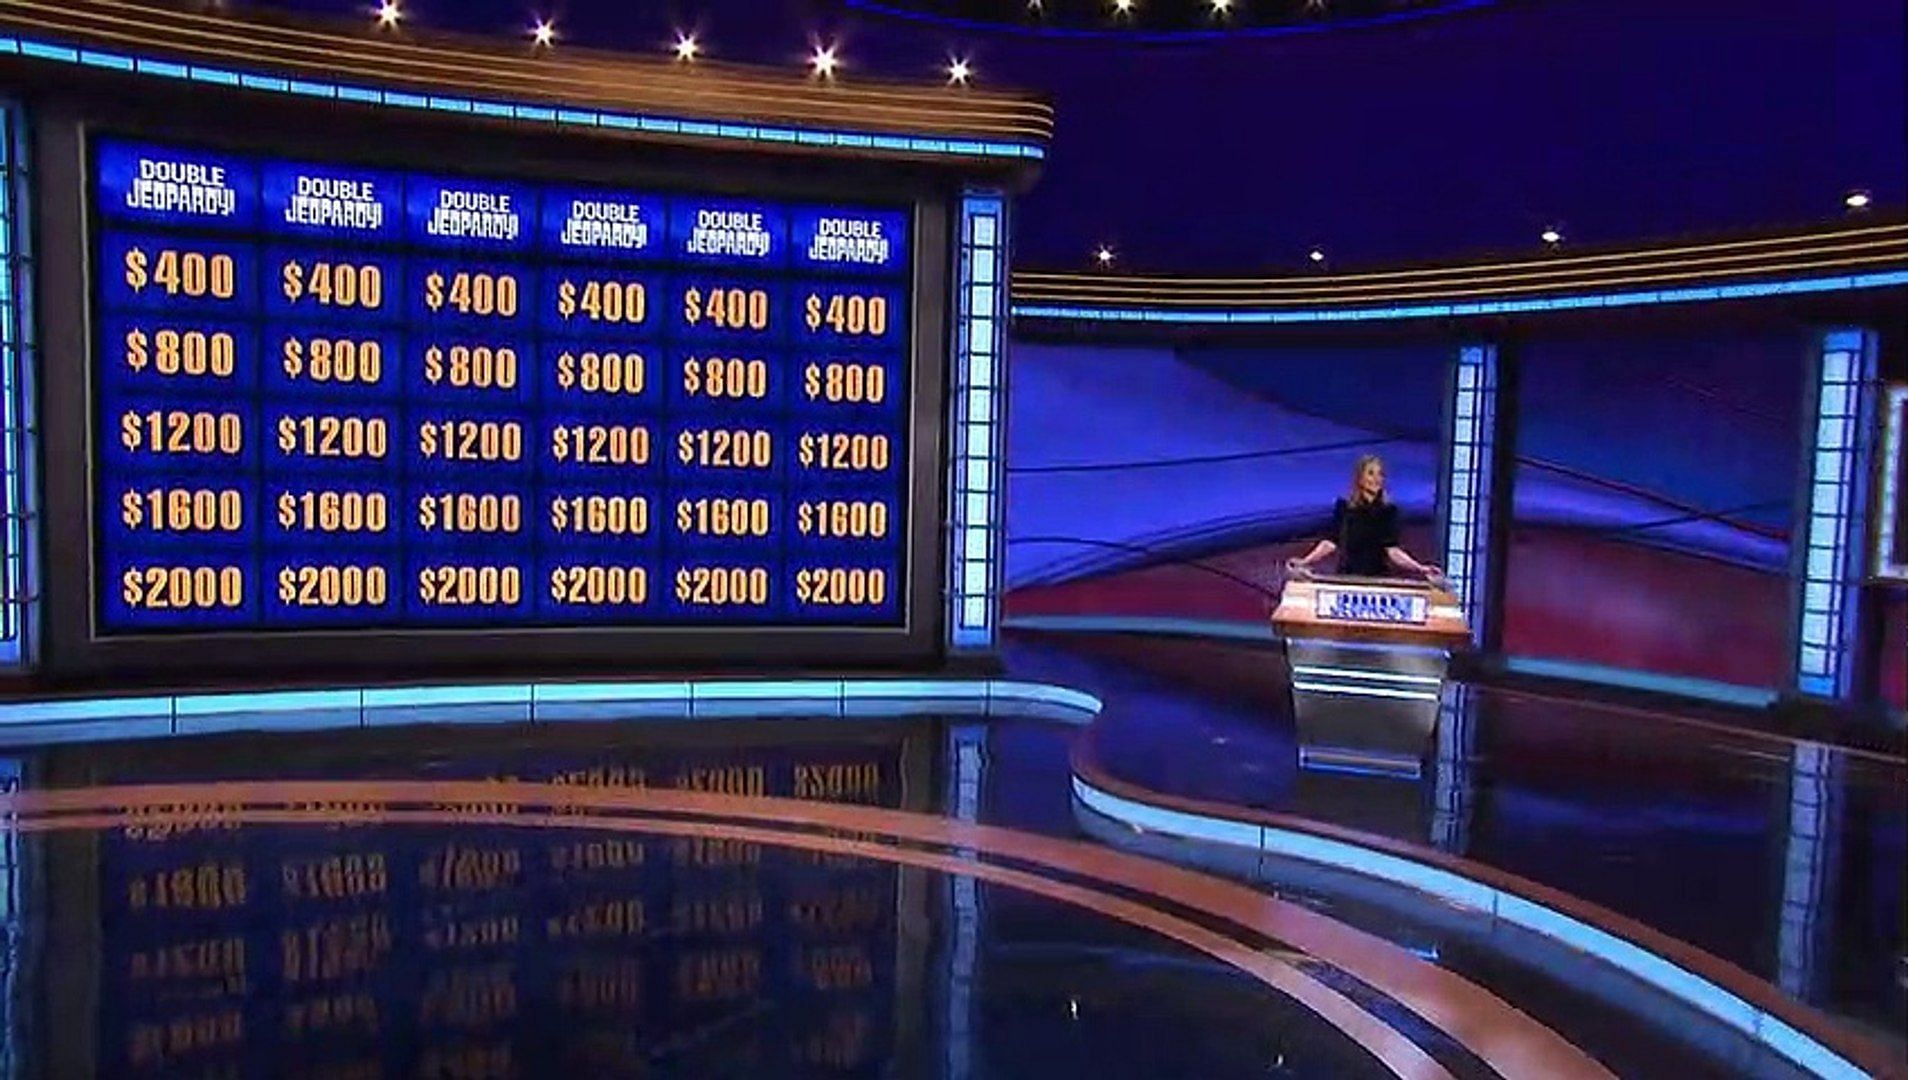 Today's Final Jeopardy! question, answer & contestants July 12, 2022